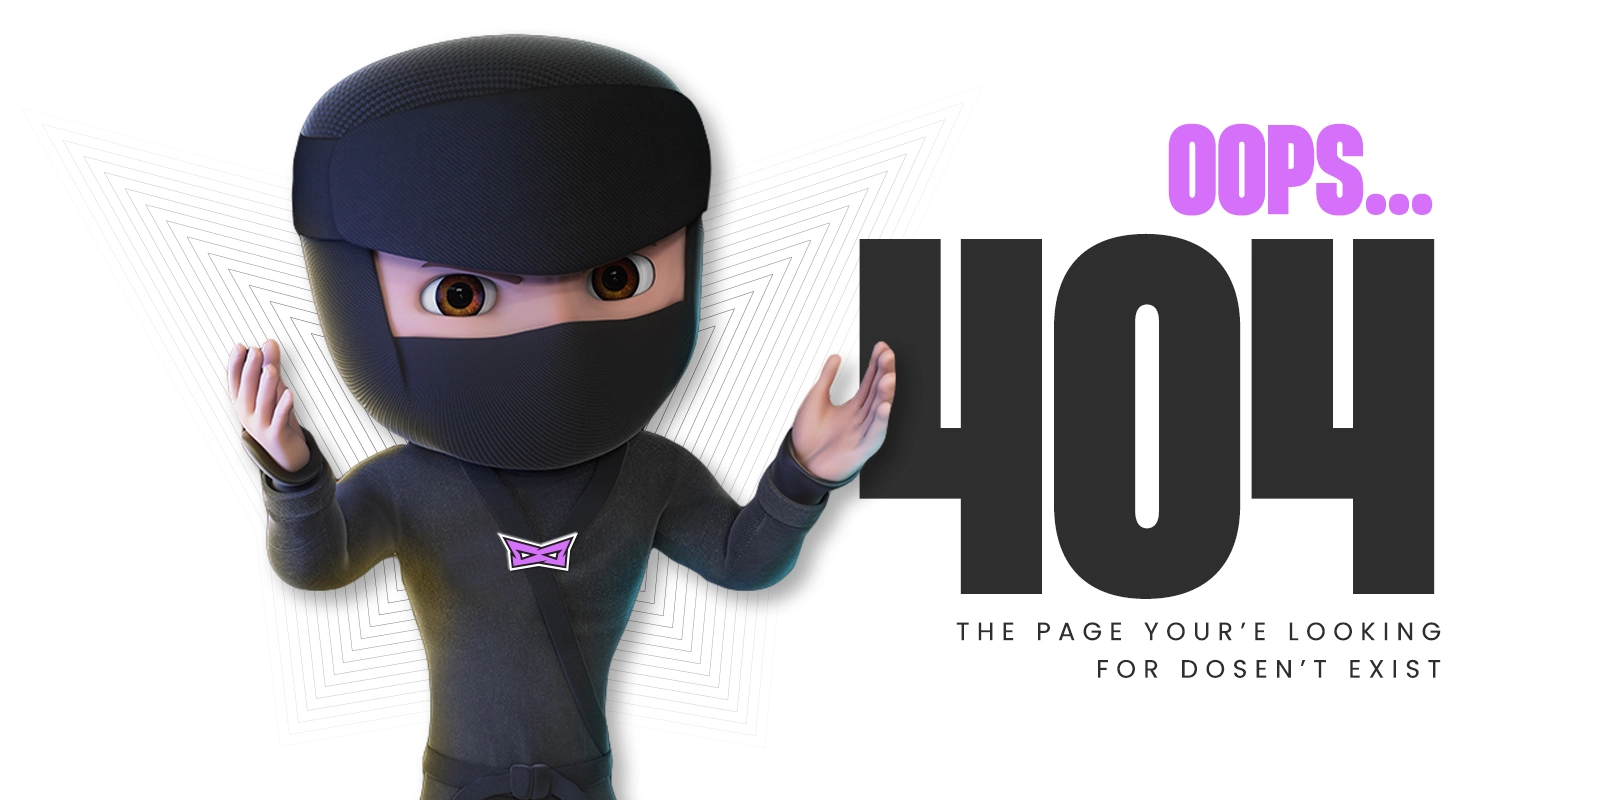 a confused black ninja on left and oops 404 written on right.